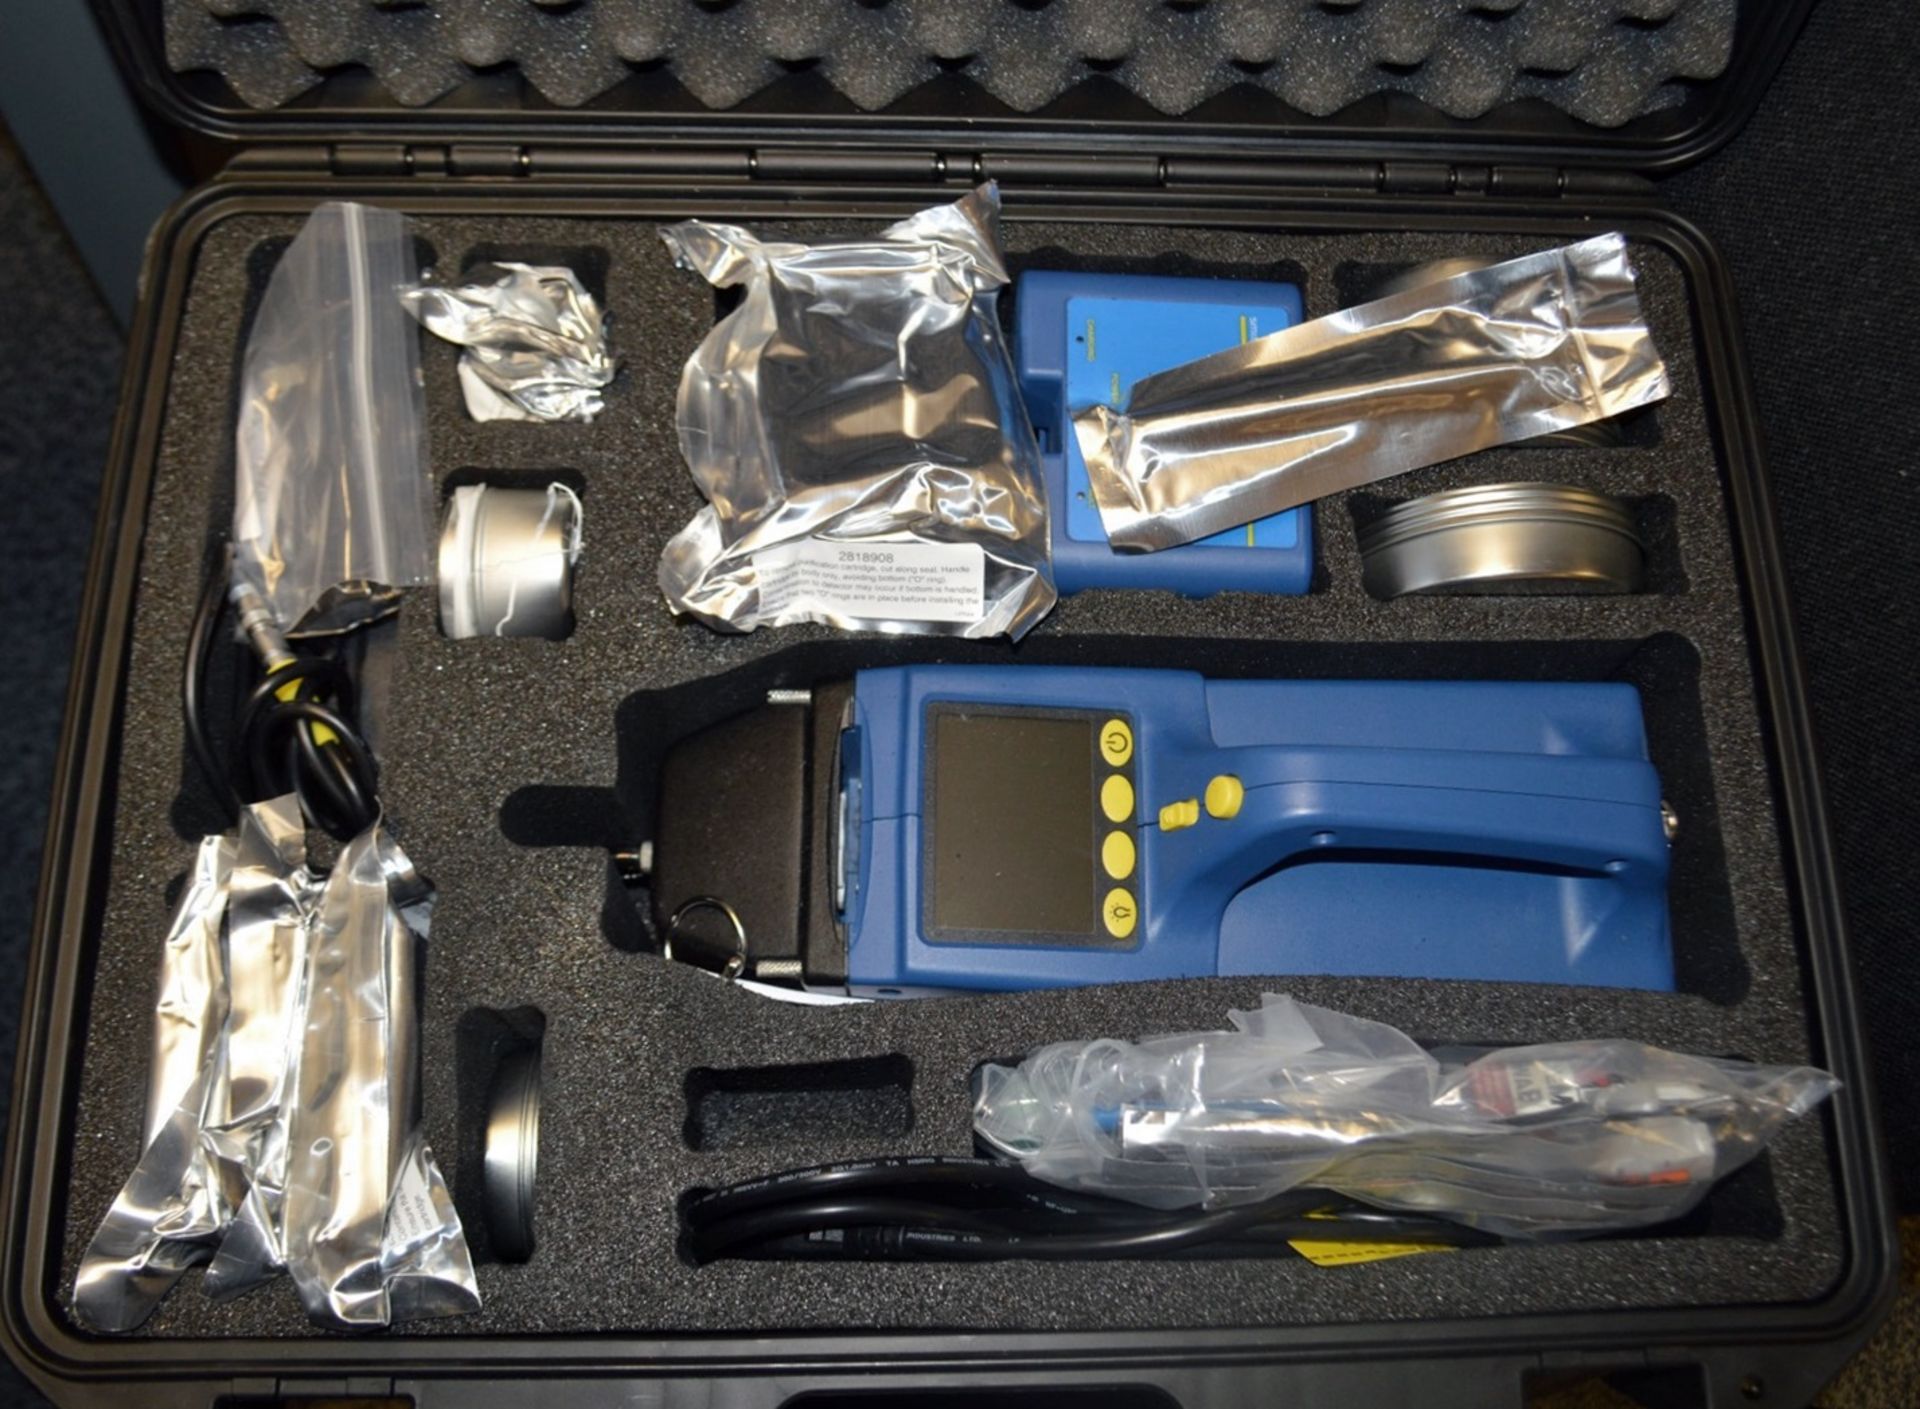 1 x SABRE™ 5000 Handheld Trace Detector - For Explosives, Chemical Agents And Toxic Chemicals - Image 3 of 31